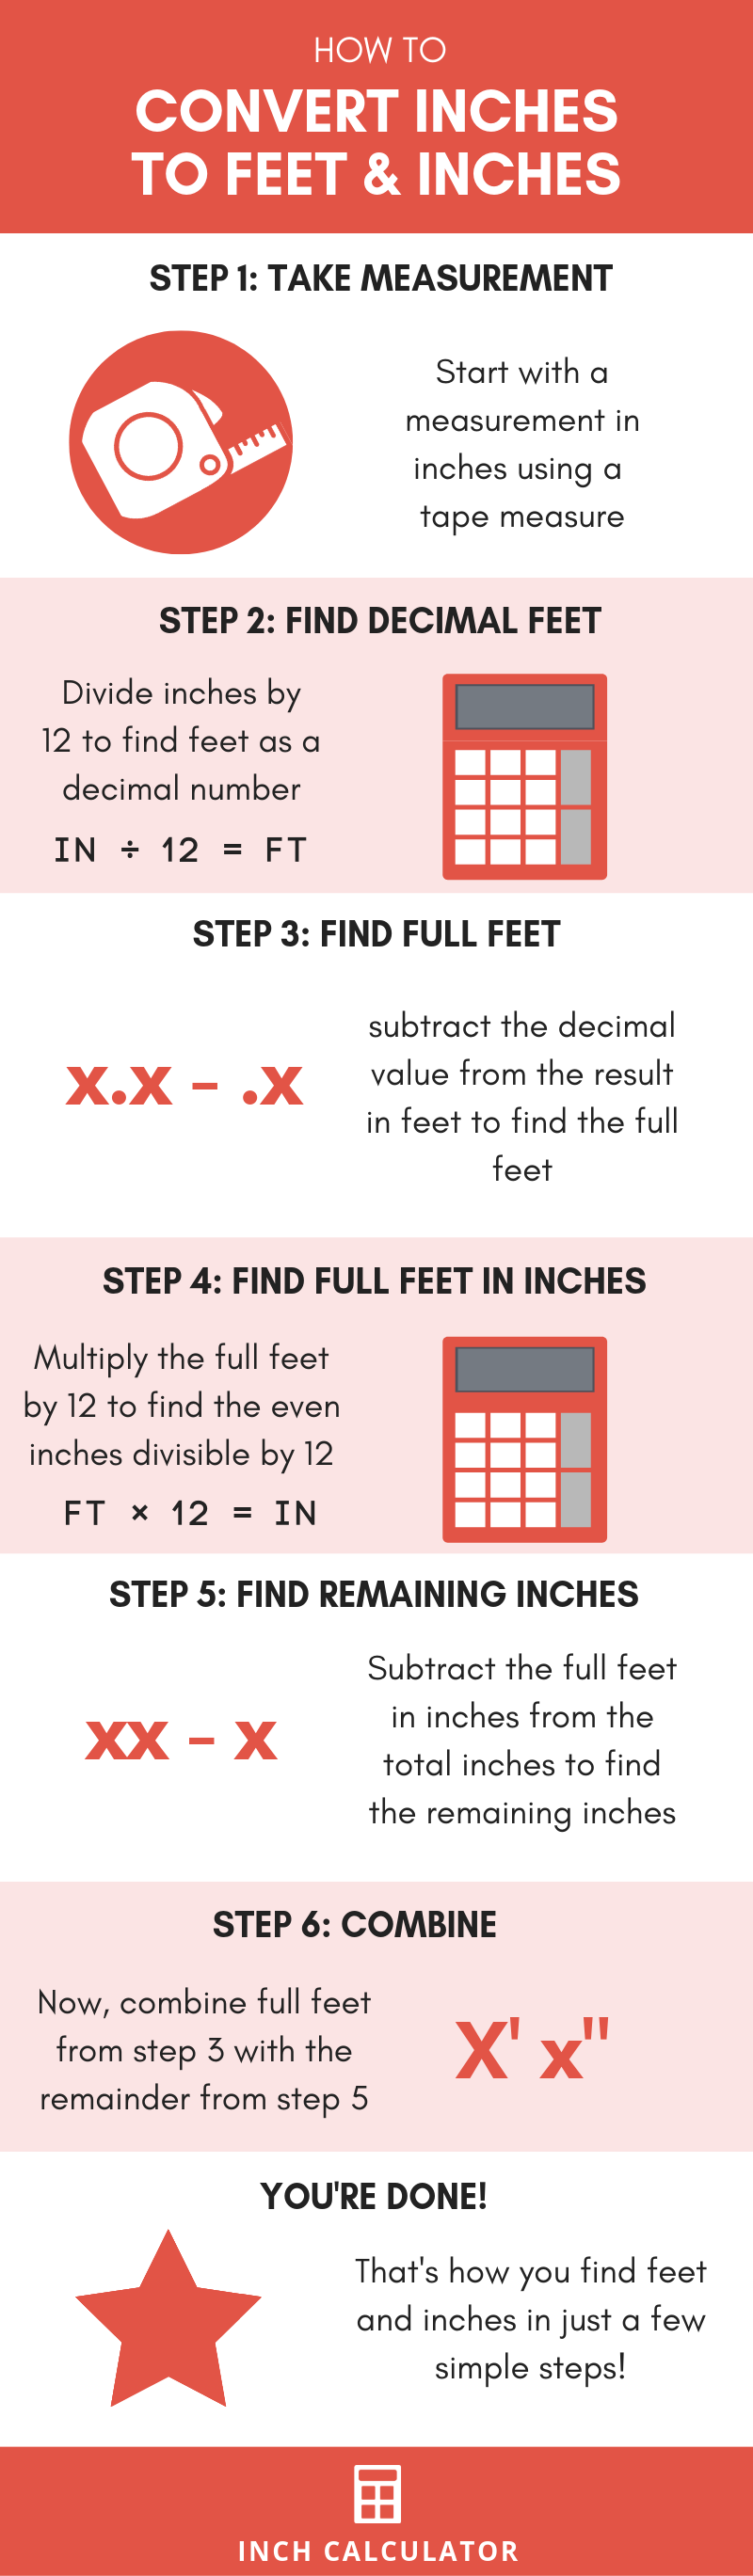 Inches to Feet Conversion Calculator (in to ft) - Inch Calculator